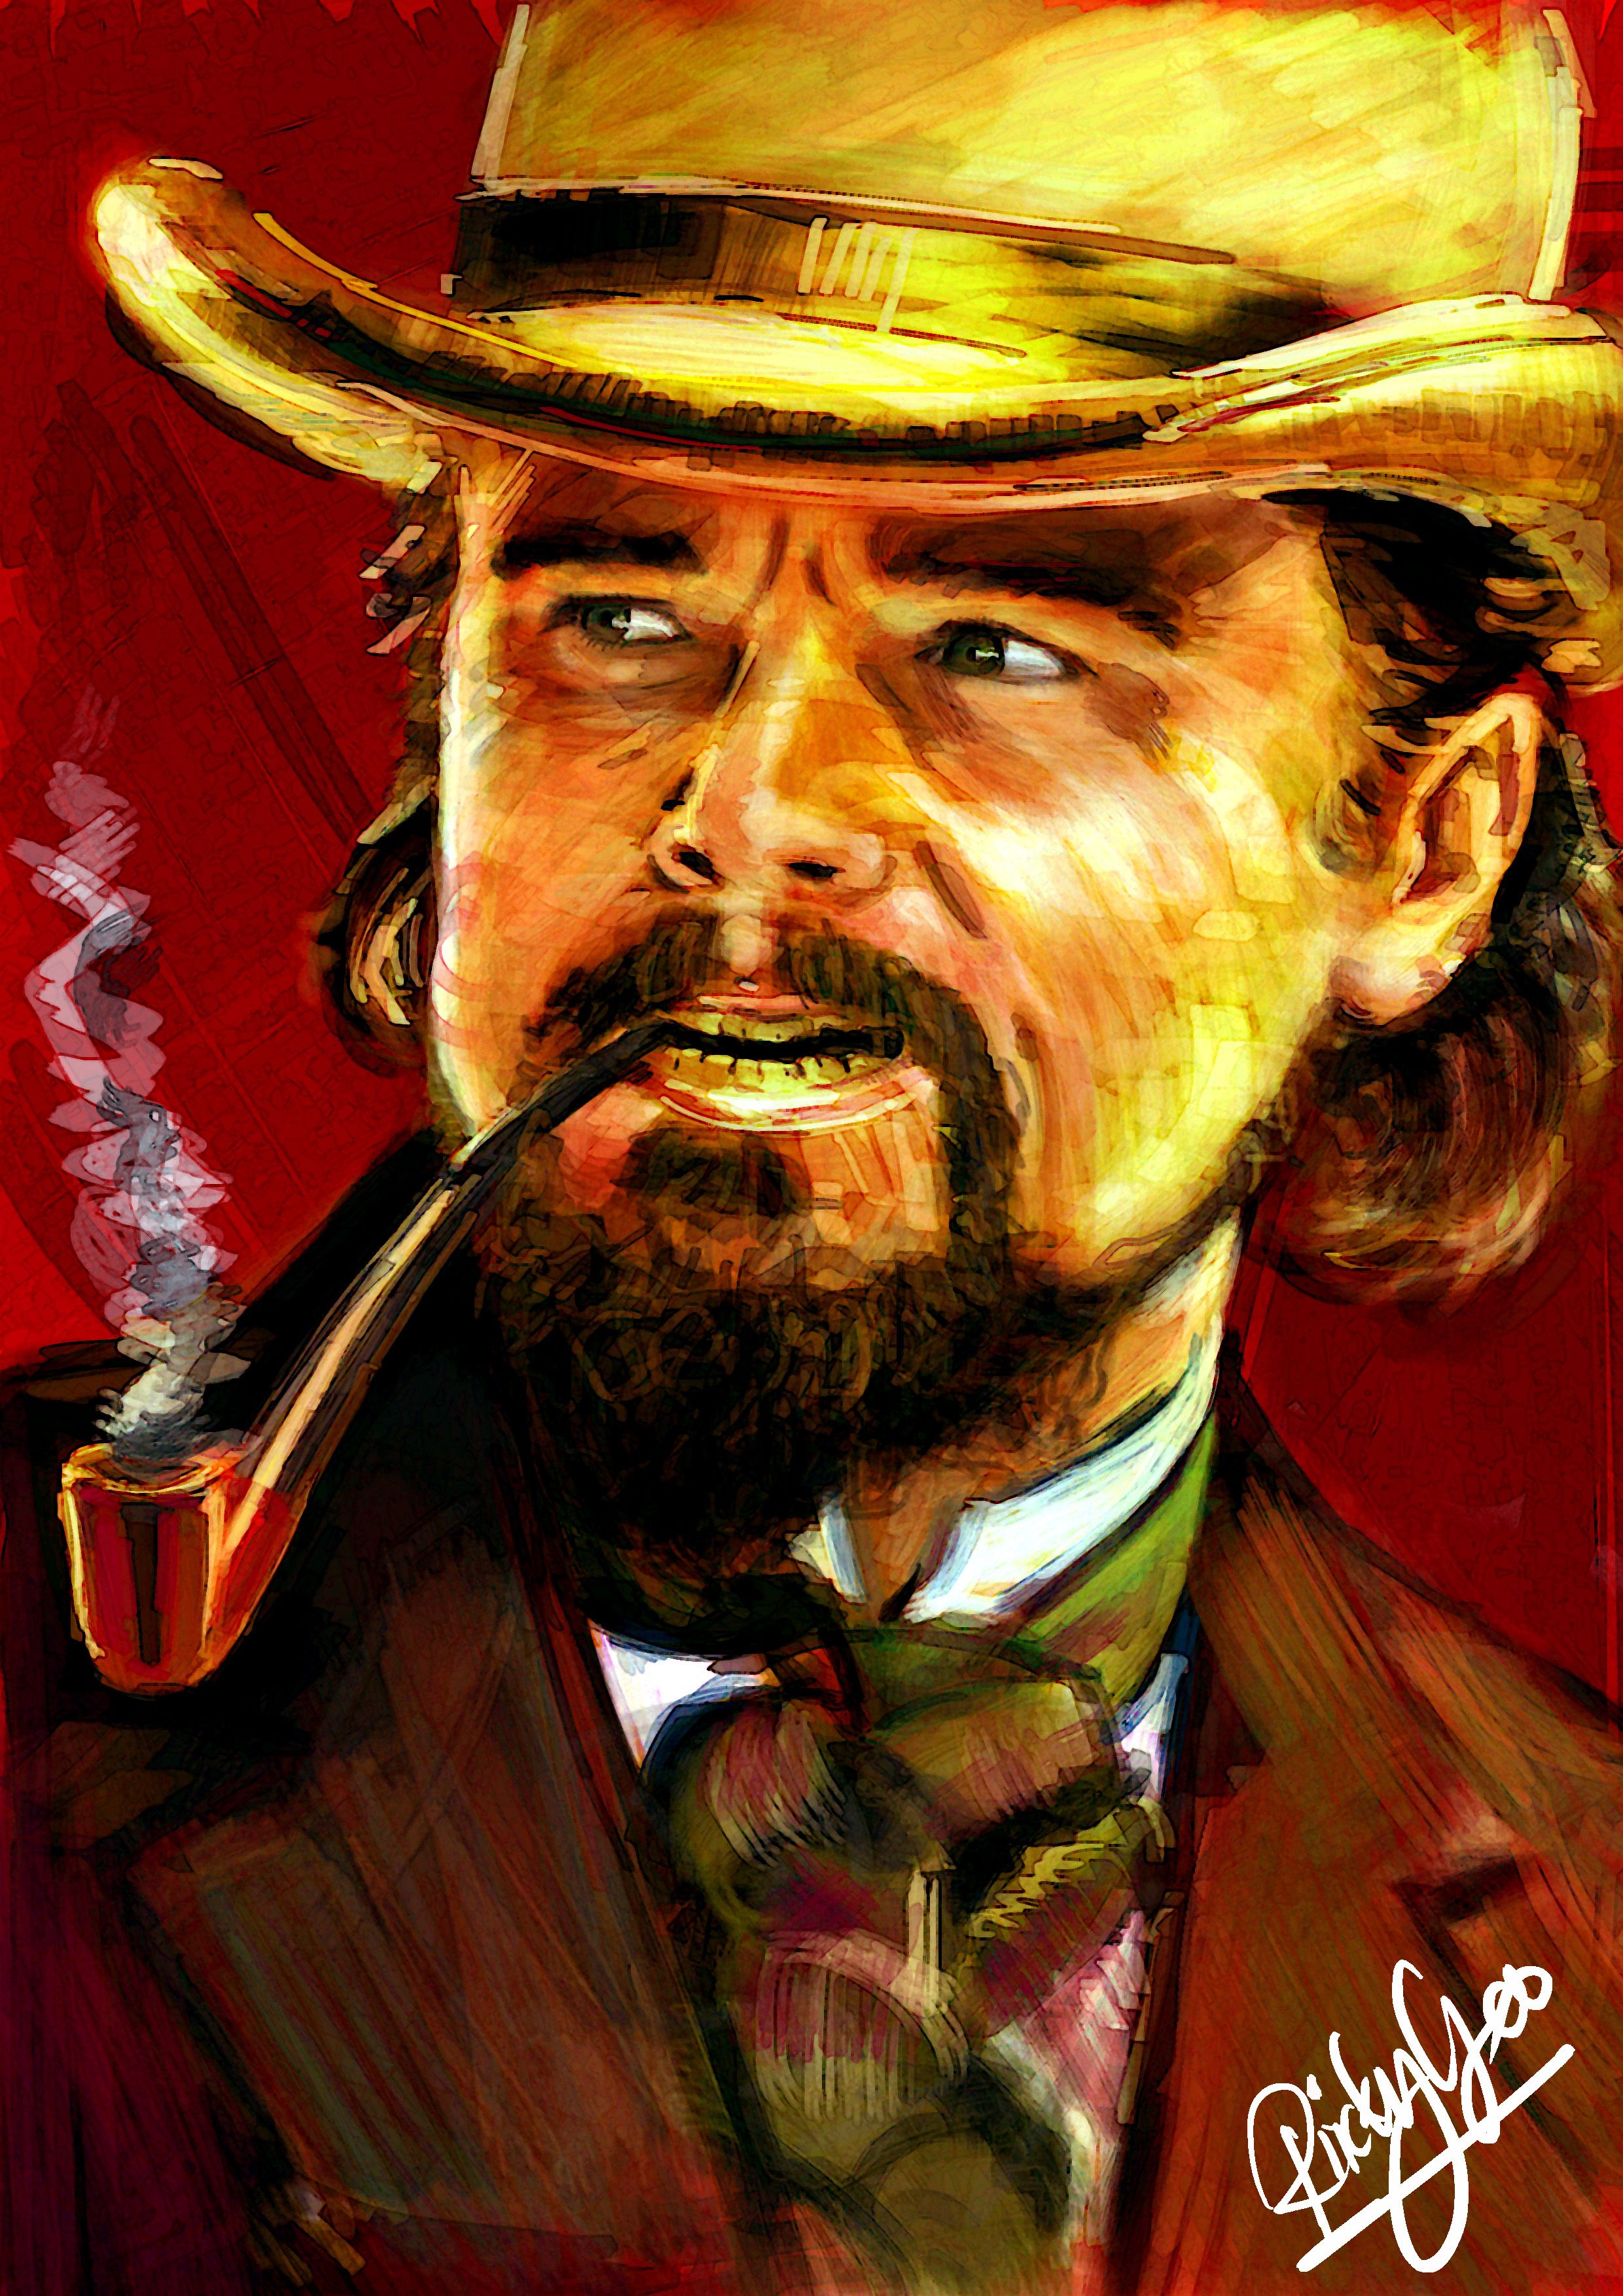 Calvin Candie Unchained. Django unchained, Tarantino films, Western movies